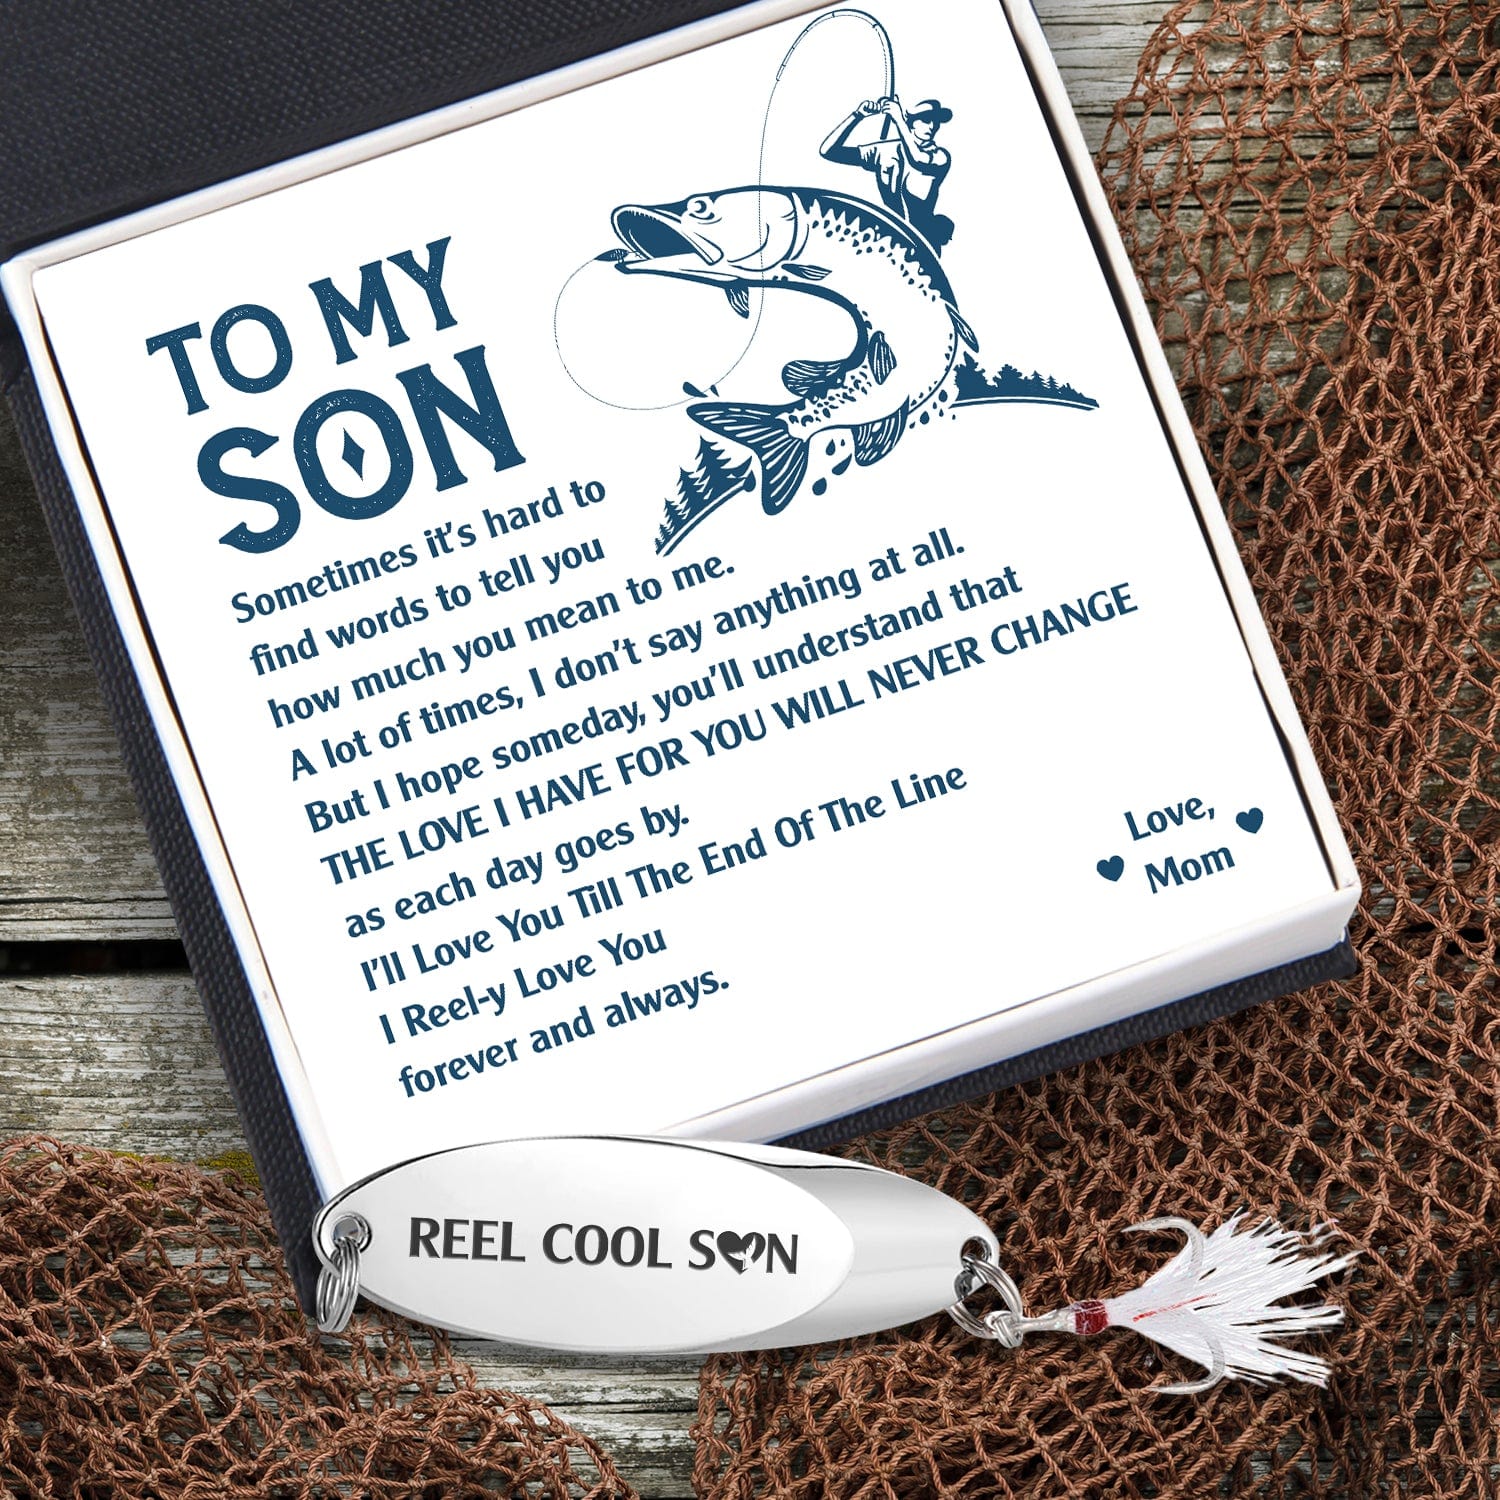 Leather Bracelet - Fishing - To My Fly Man - I'll Love You Till The En -  Gifts Holder